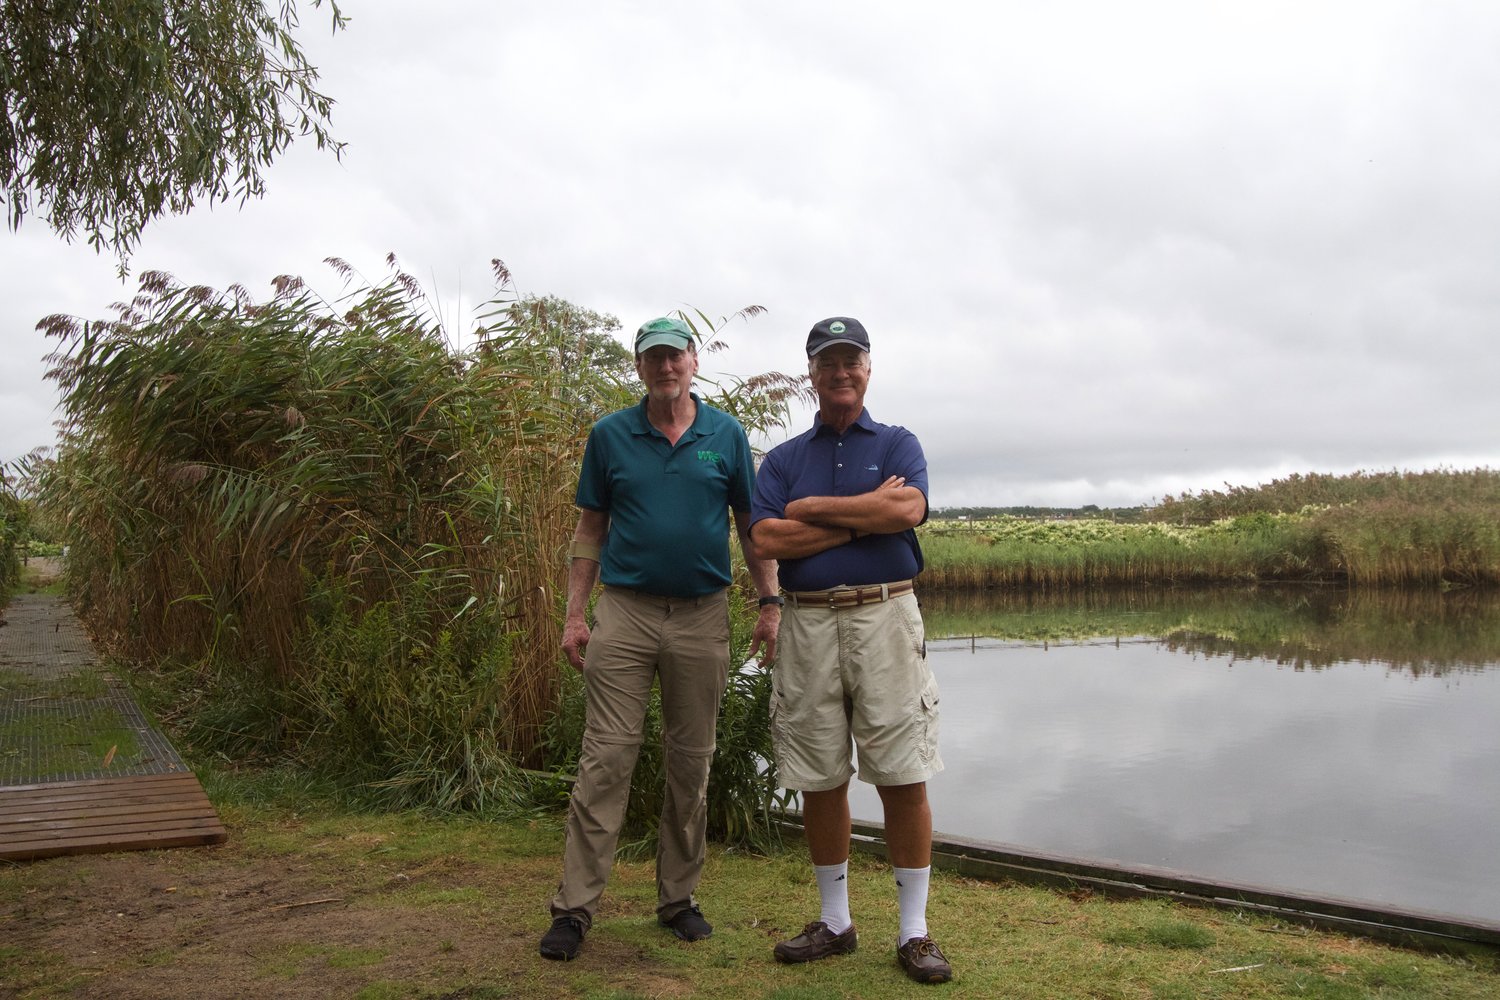 Ken Wagner and Bob Williams at the duck pond at Consue Springs, where the phragmites makes up approximately 95 percent of the vegetation, according to SOLitude.